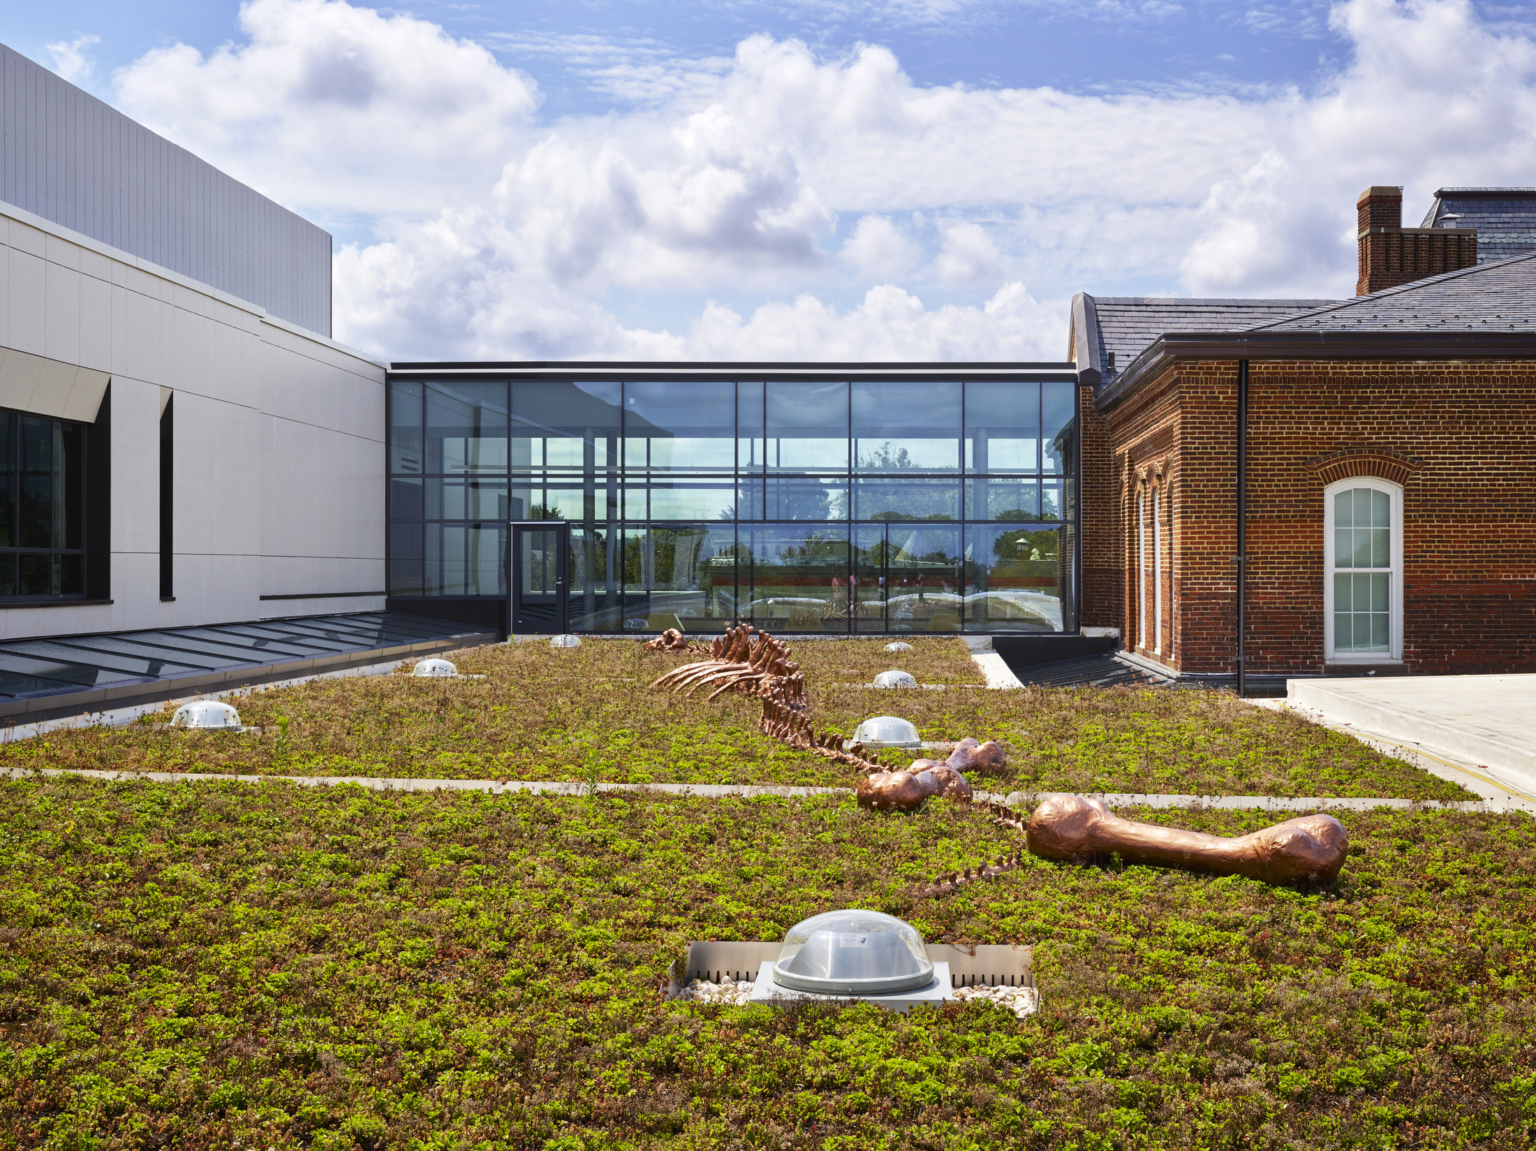 Rooftop greenery area with dinosaur bones for discovery at Maury Elementary School.